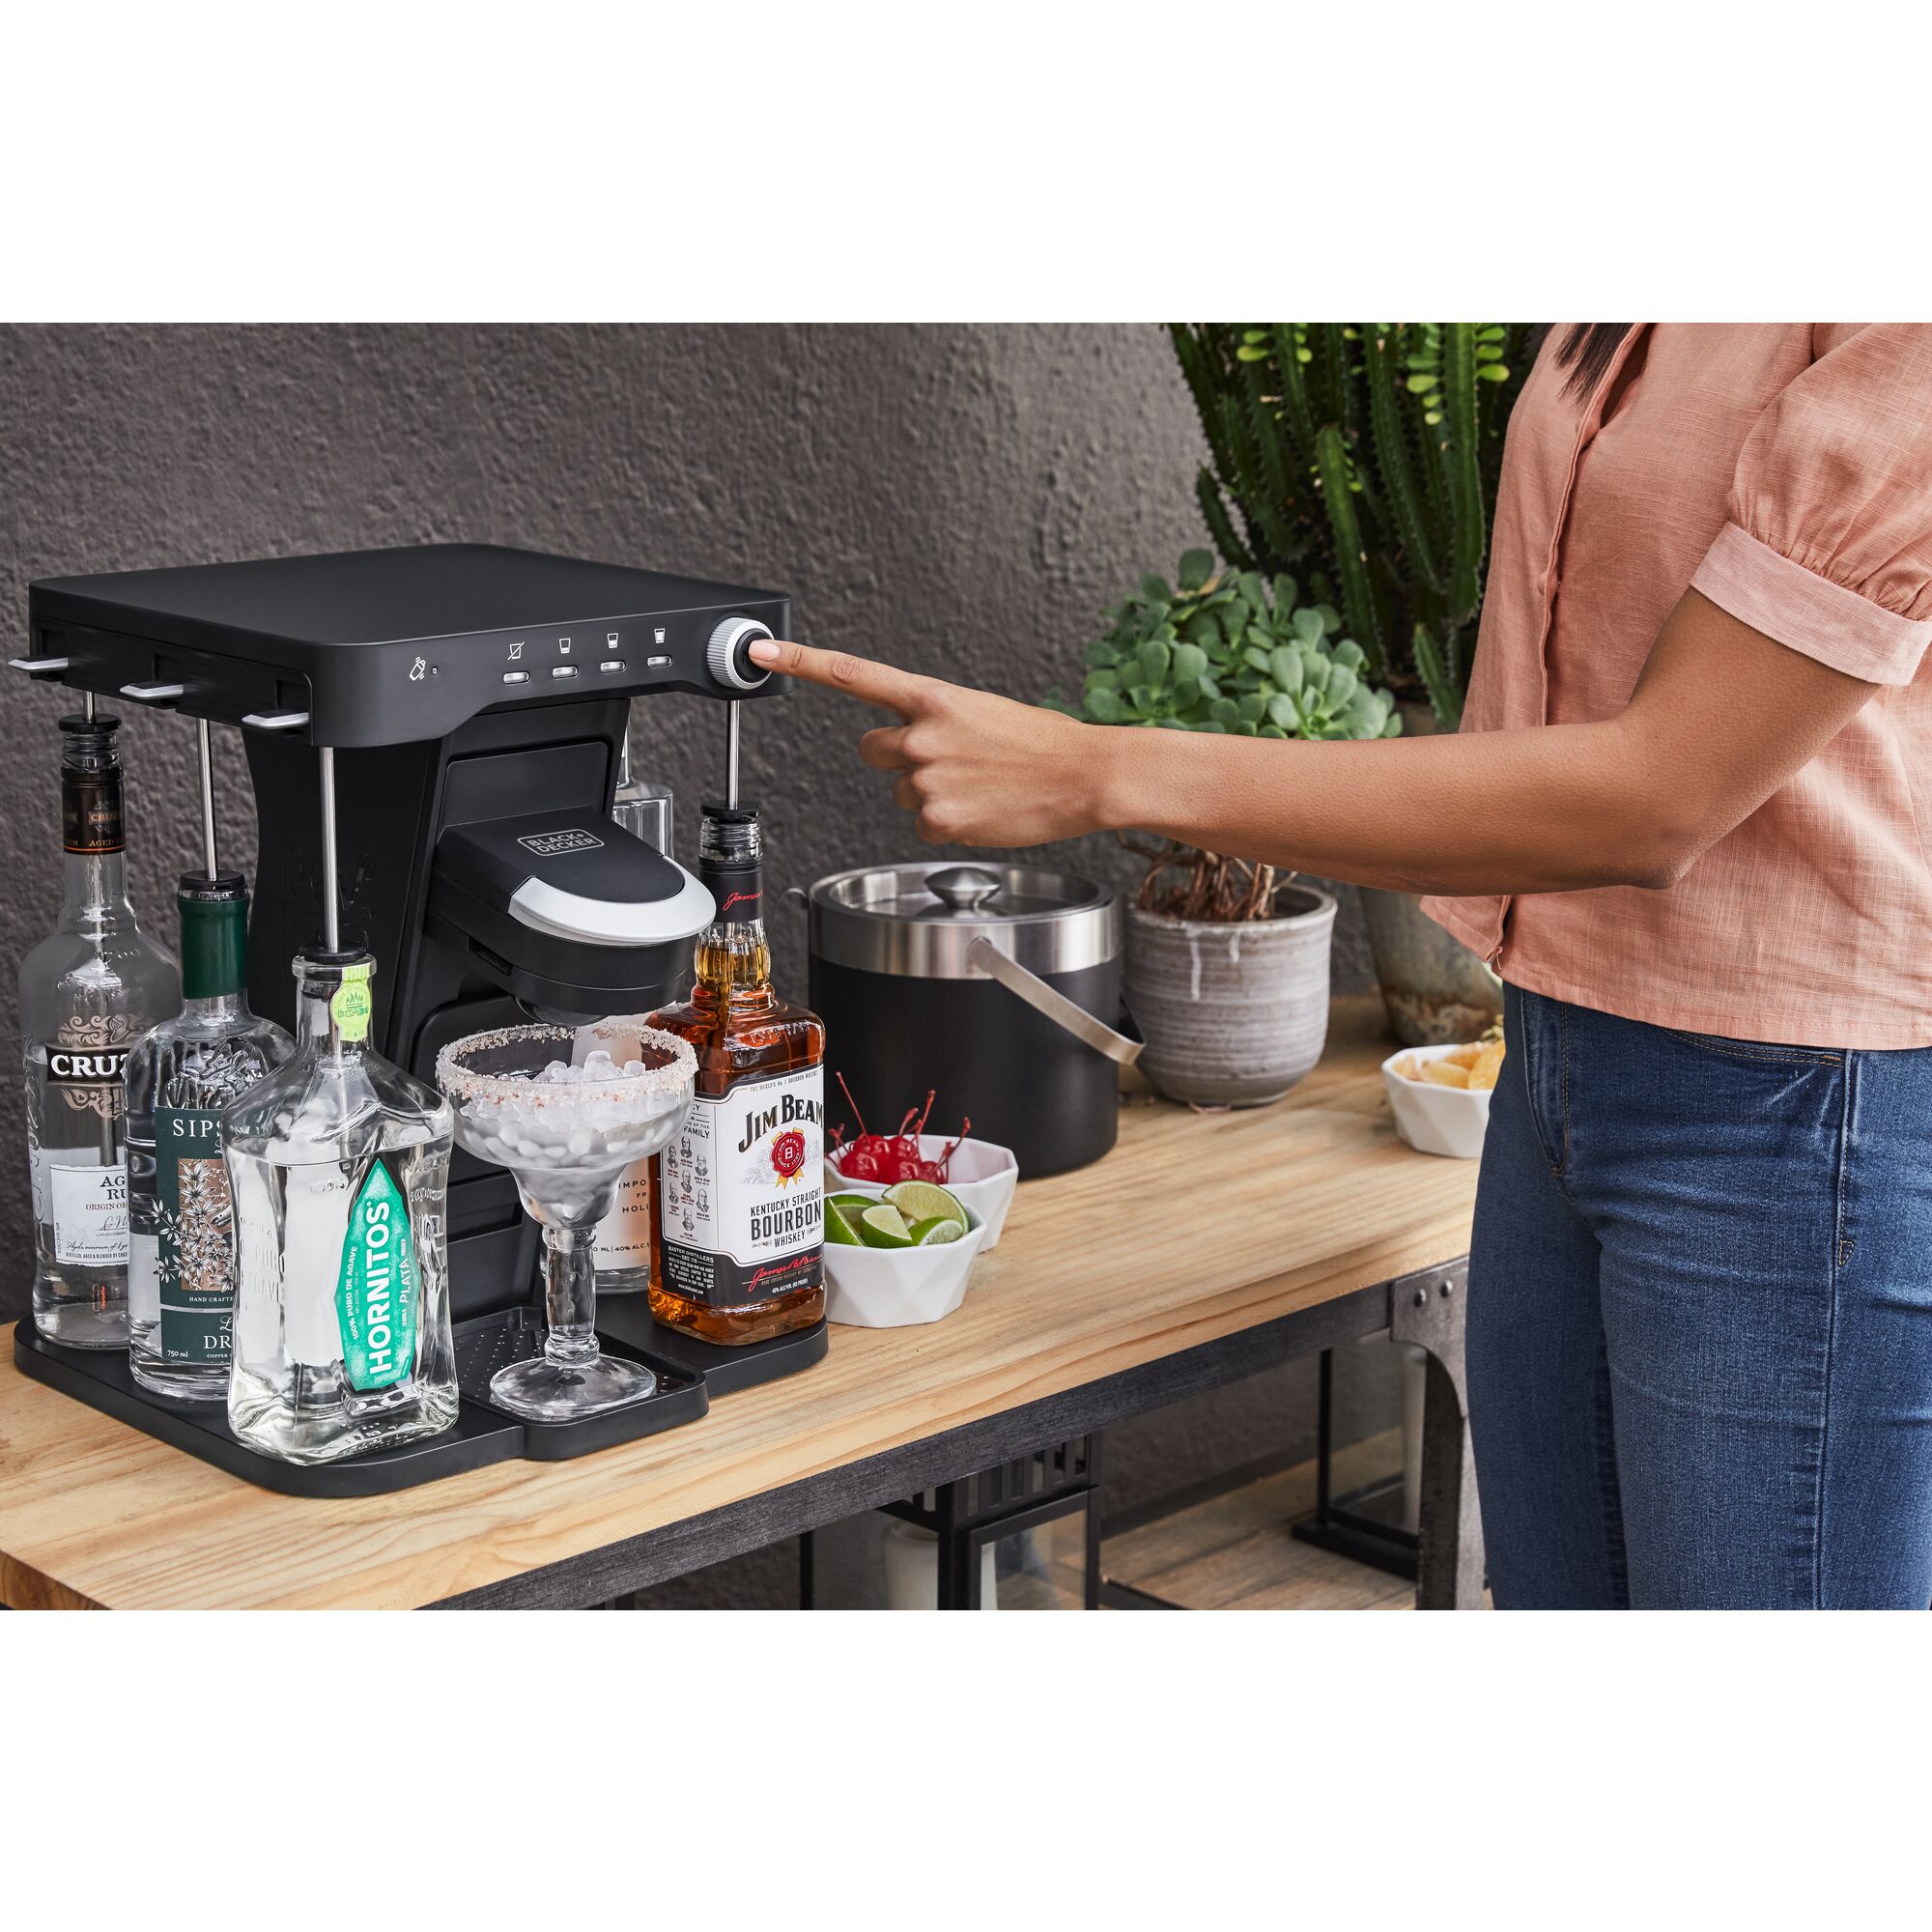 Person using the bev by Black and decker coctail machine with the black and decker ice bucket sitting next to it on a wooden table